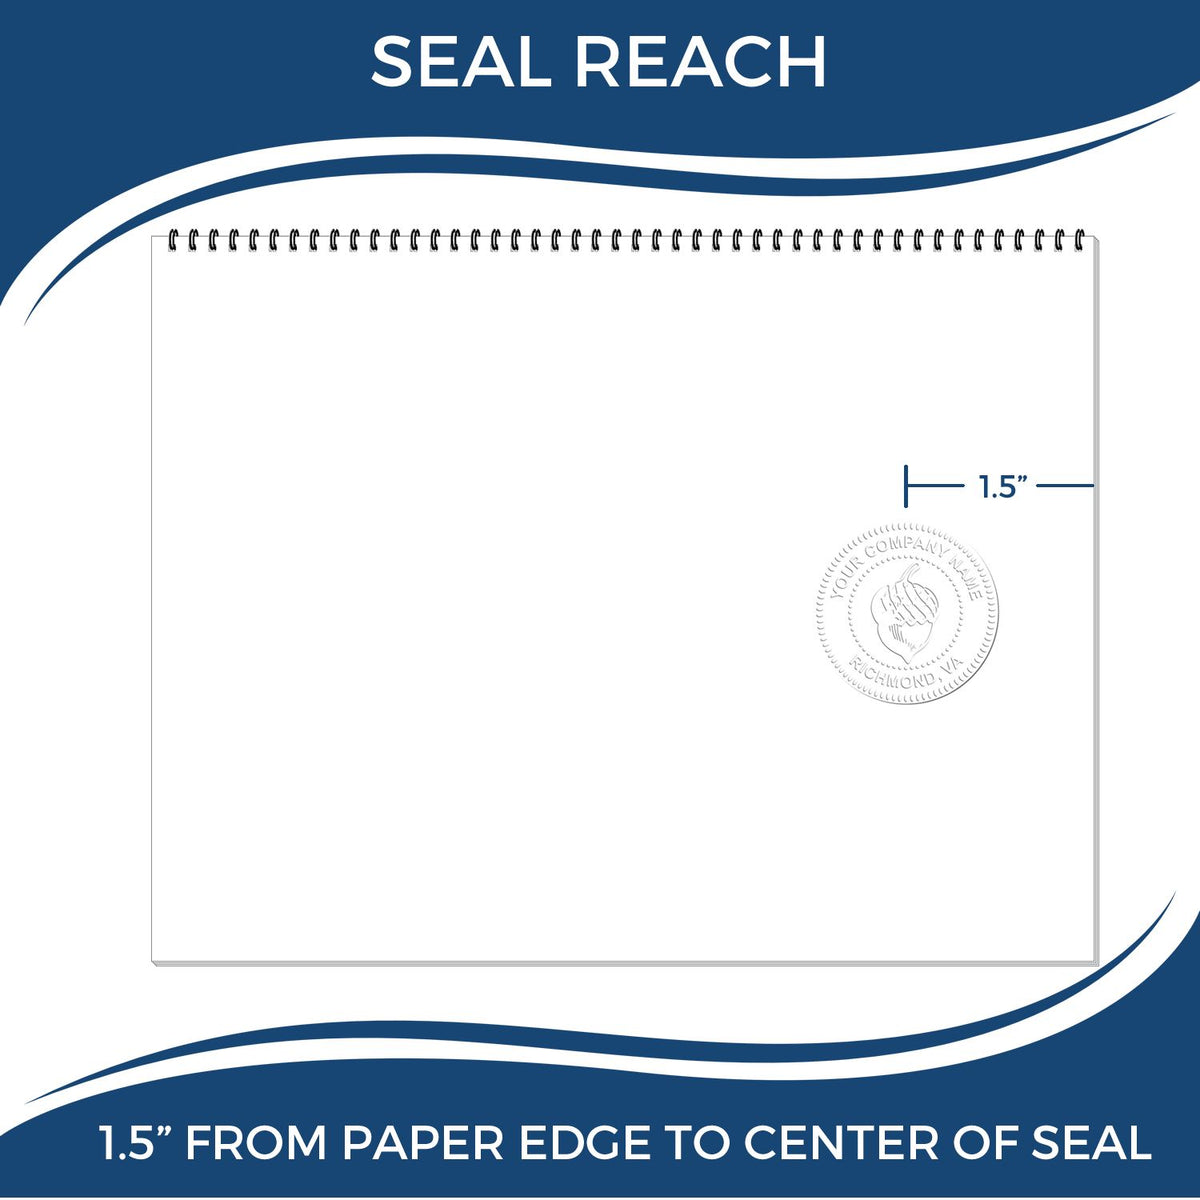 An infographic showing the seal reach which is represented by a ruler and a miniature seal image of the Mississippi Desk Surveyor Seal Embosser